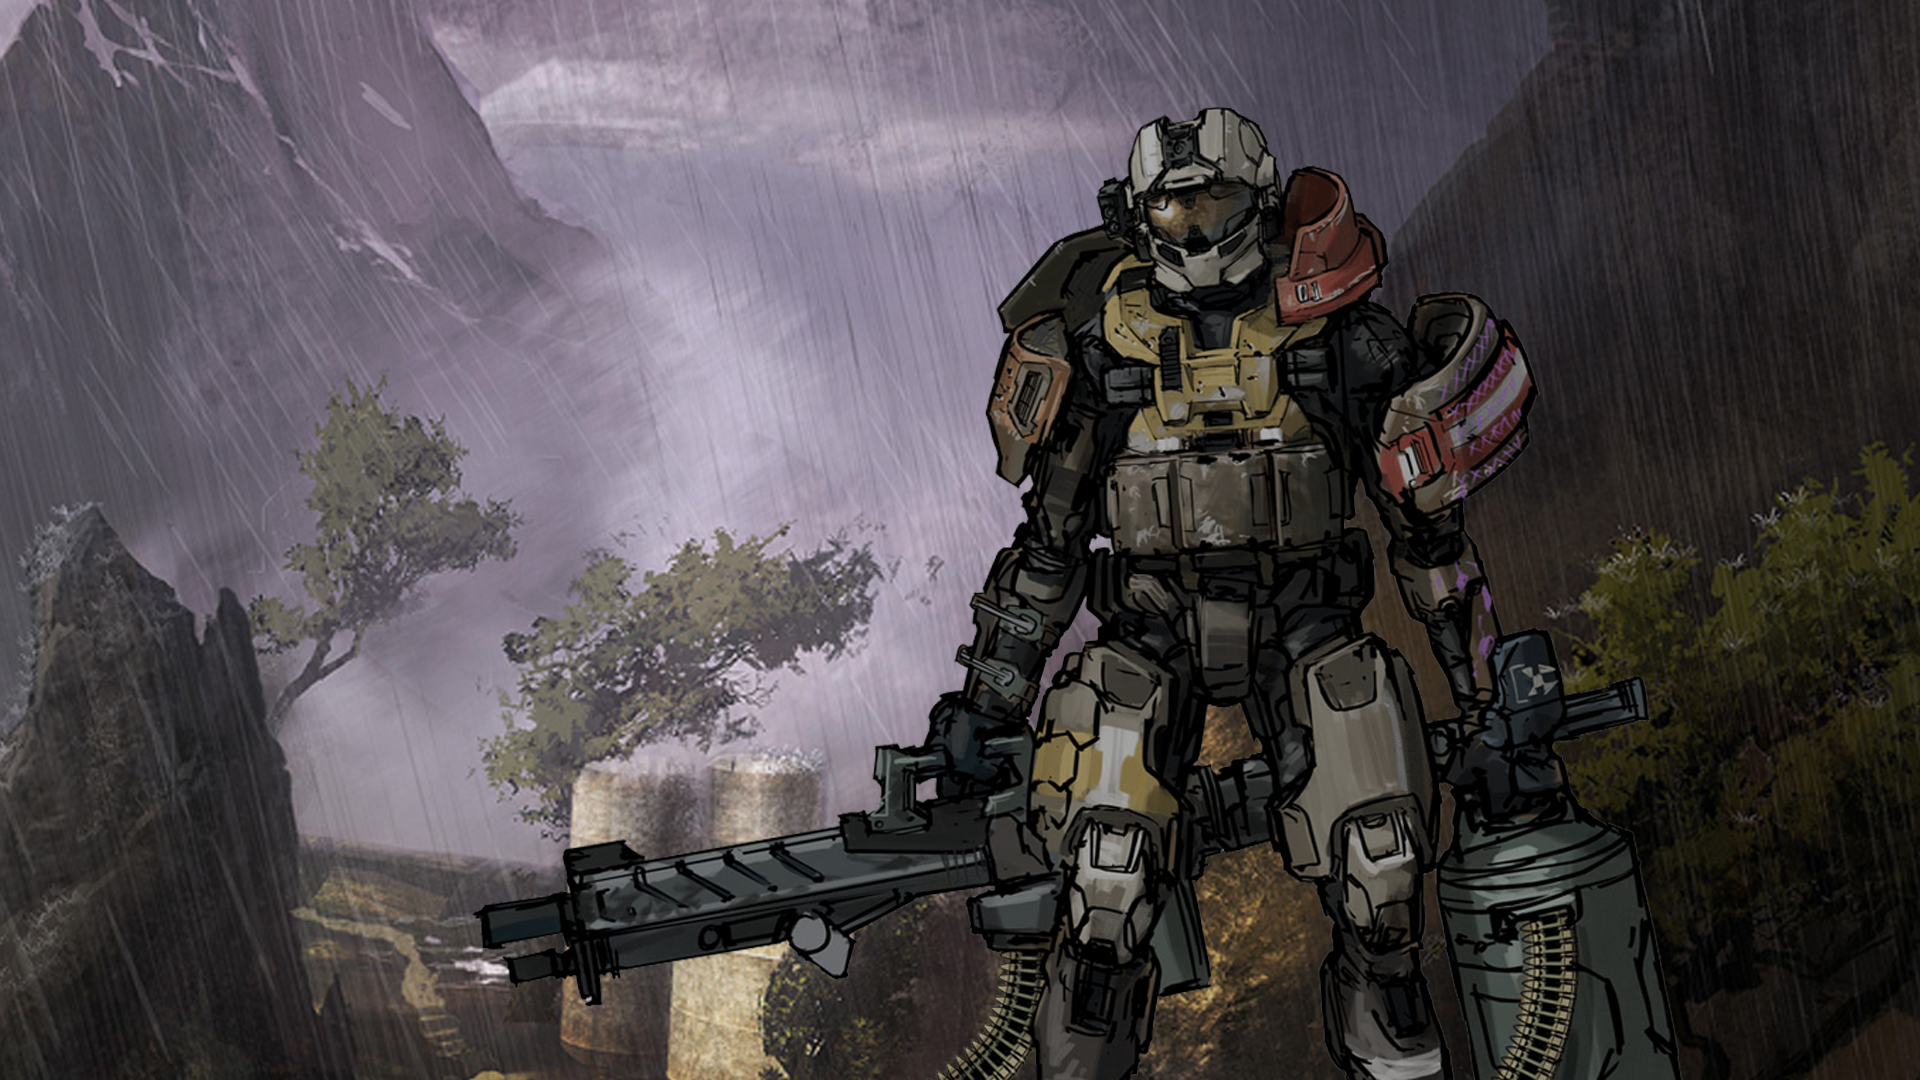 Halo Reach Emile Wallpapers